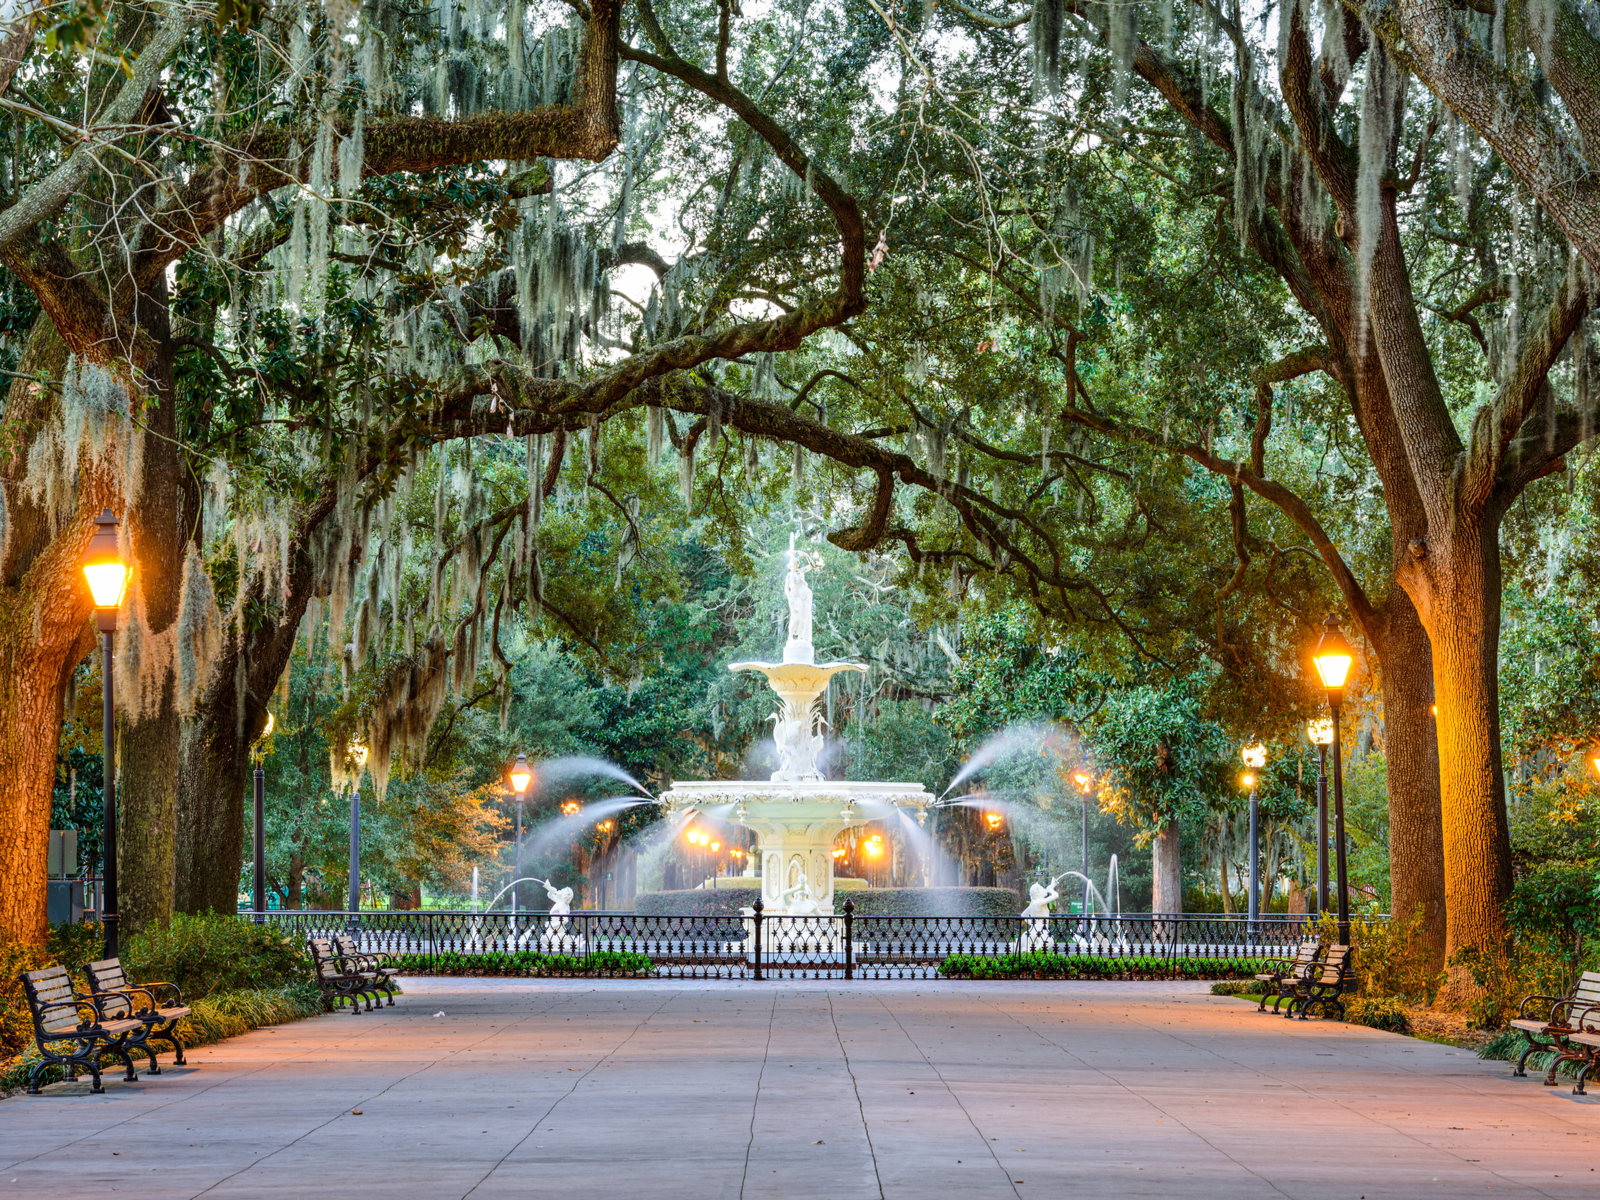 Forsyth park fountain pictured at dusk during the best time to visit Savannah Georgia